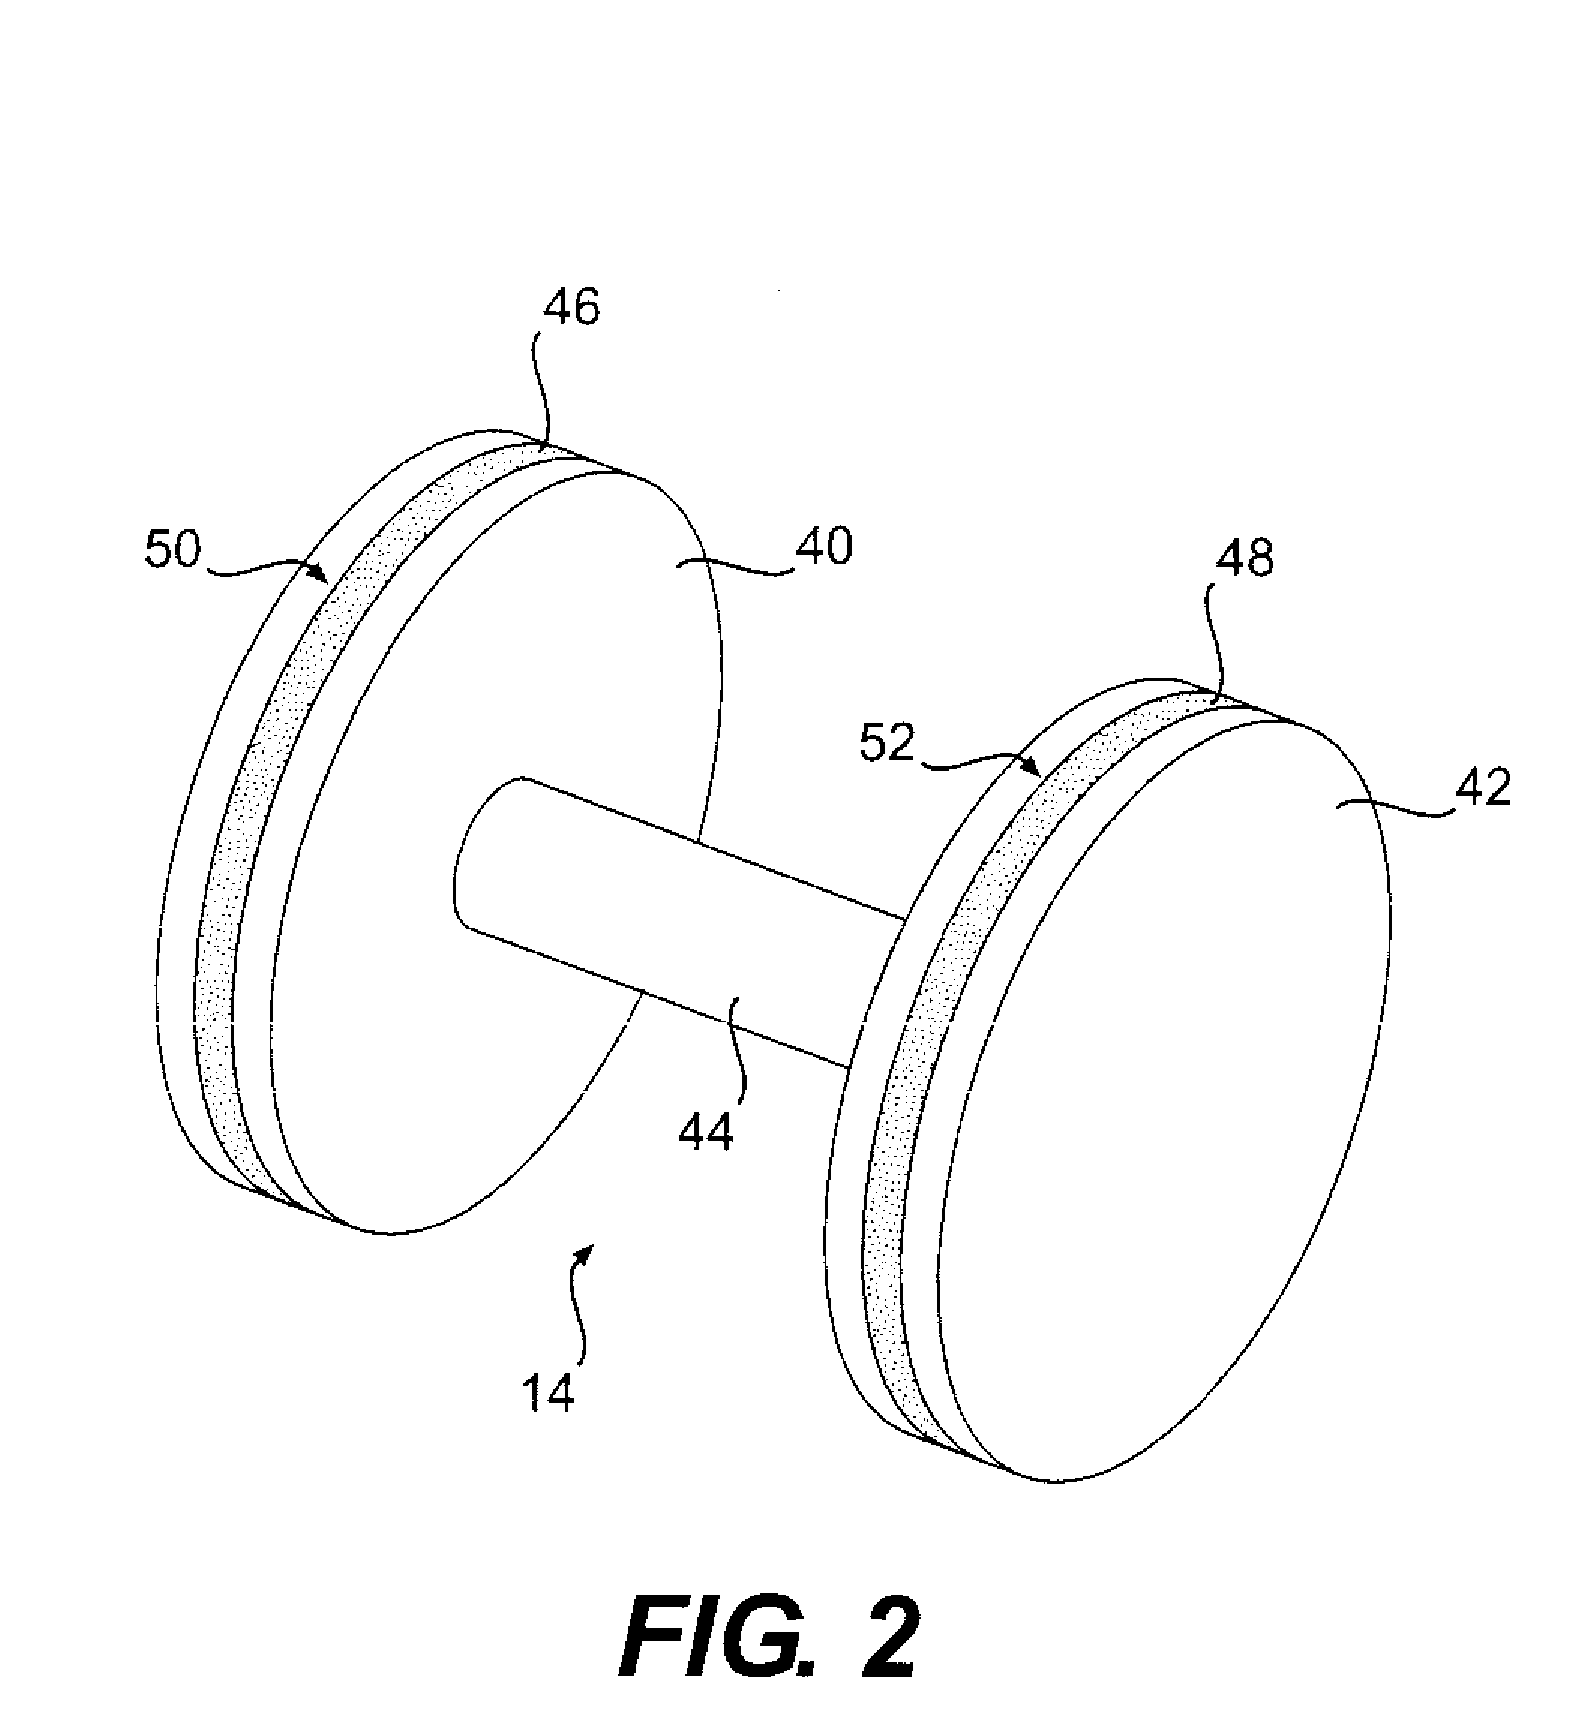 Open loop heat pipe radiator having a free-piston for wiping condensed working fluid